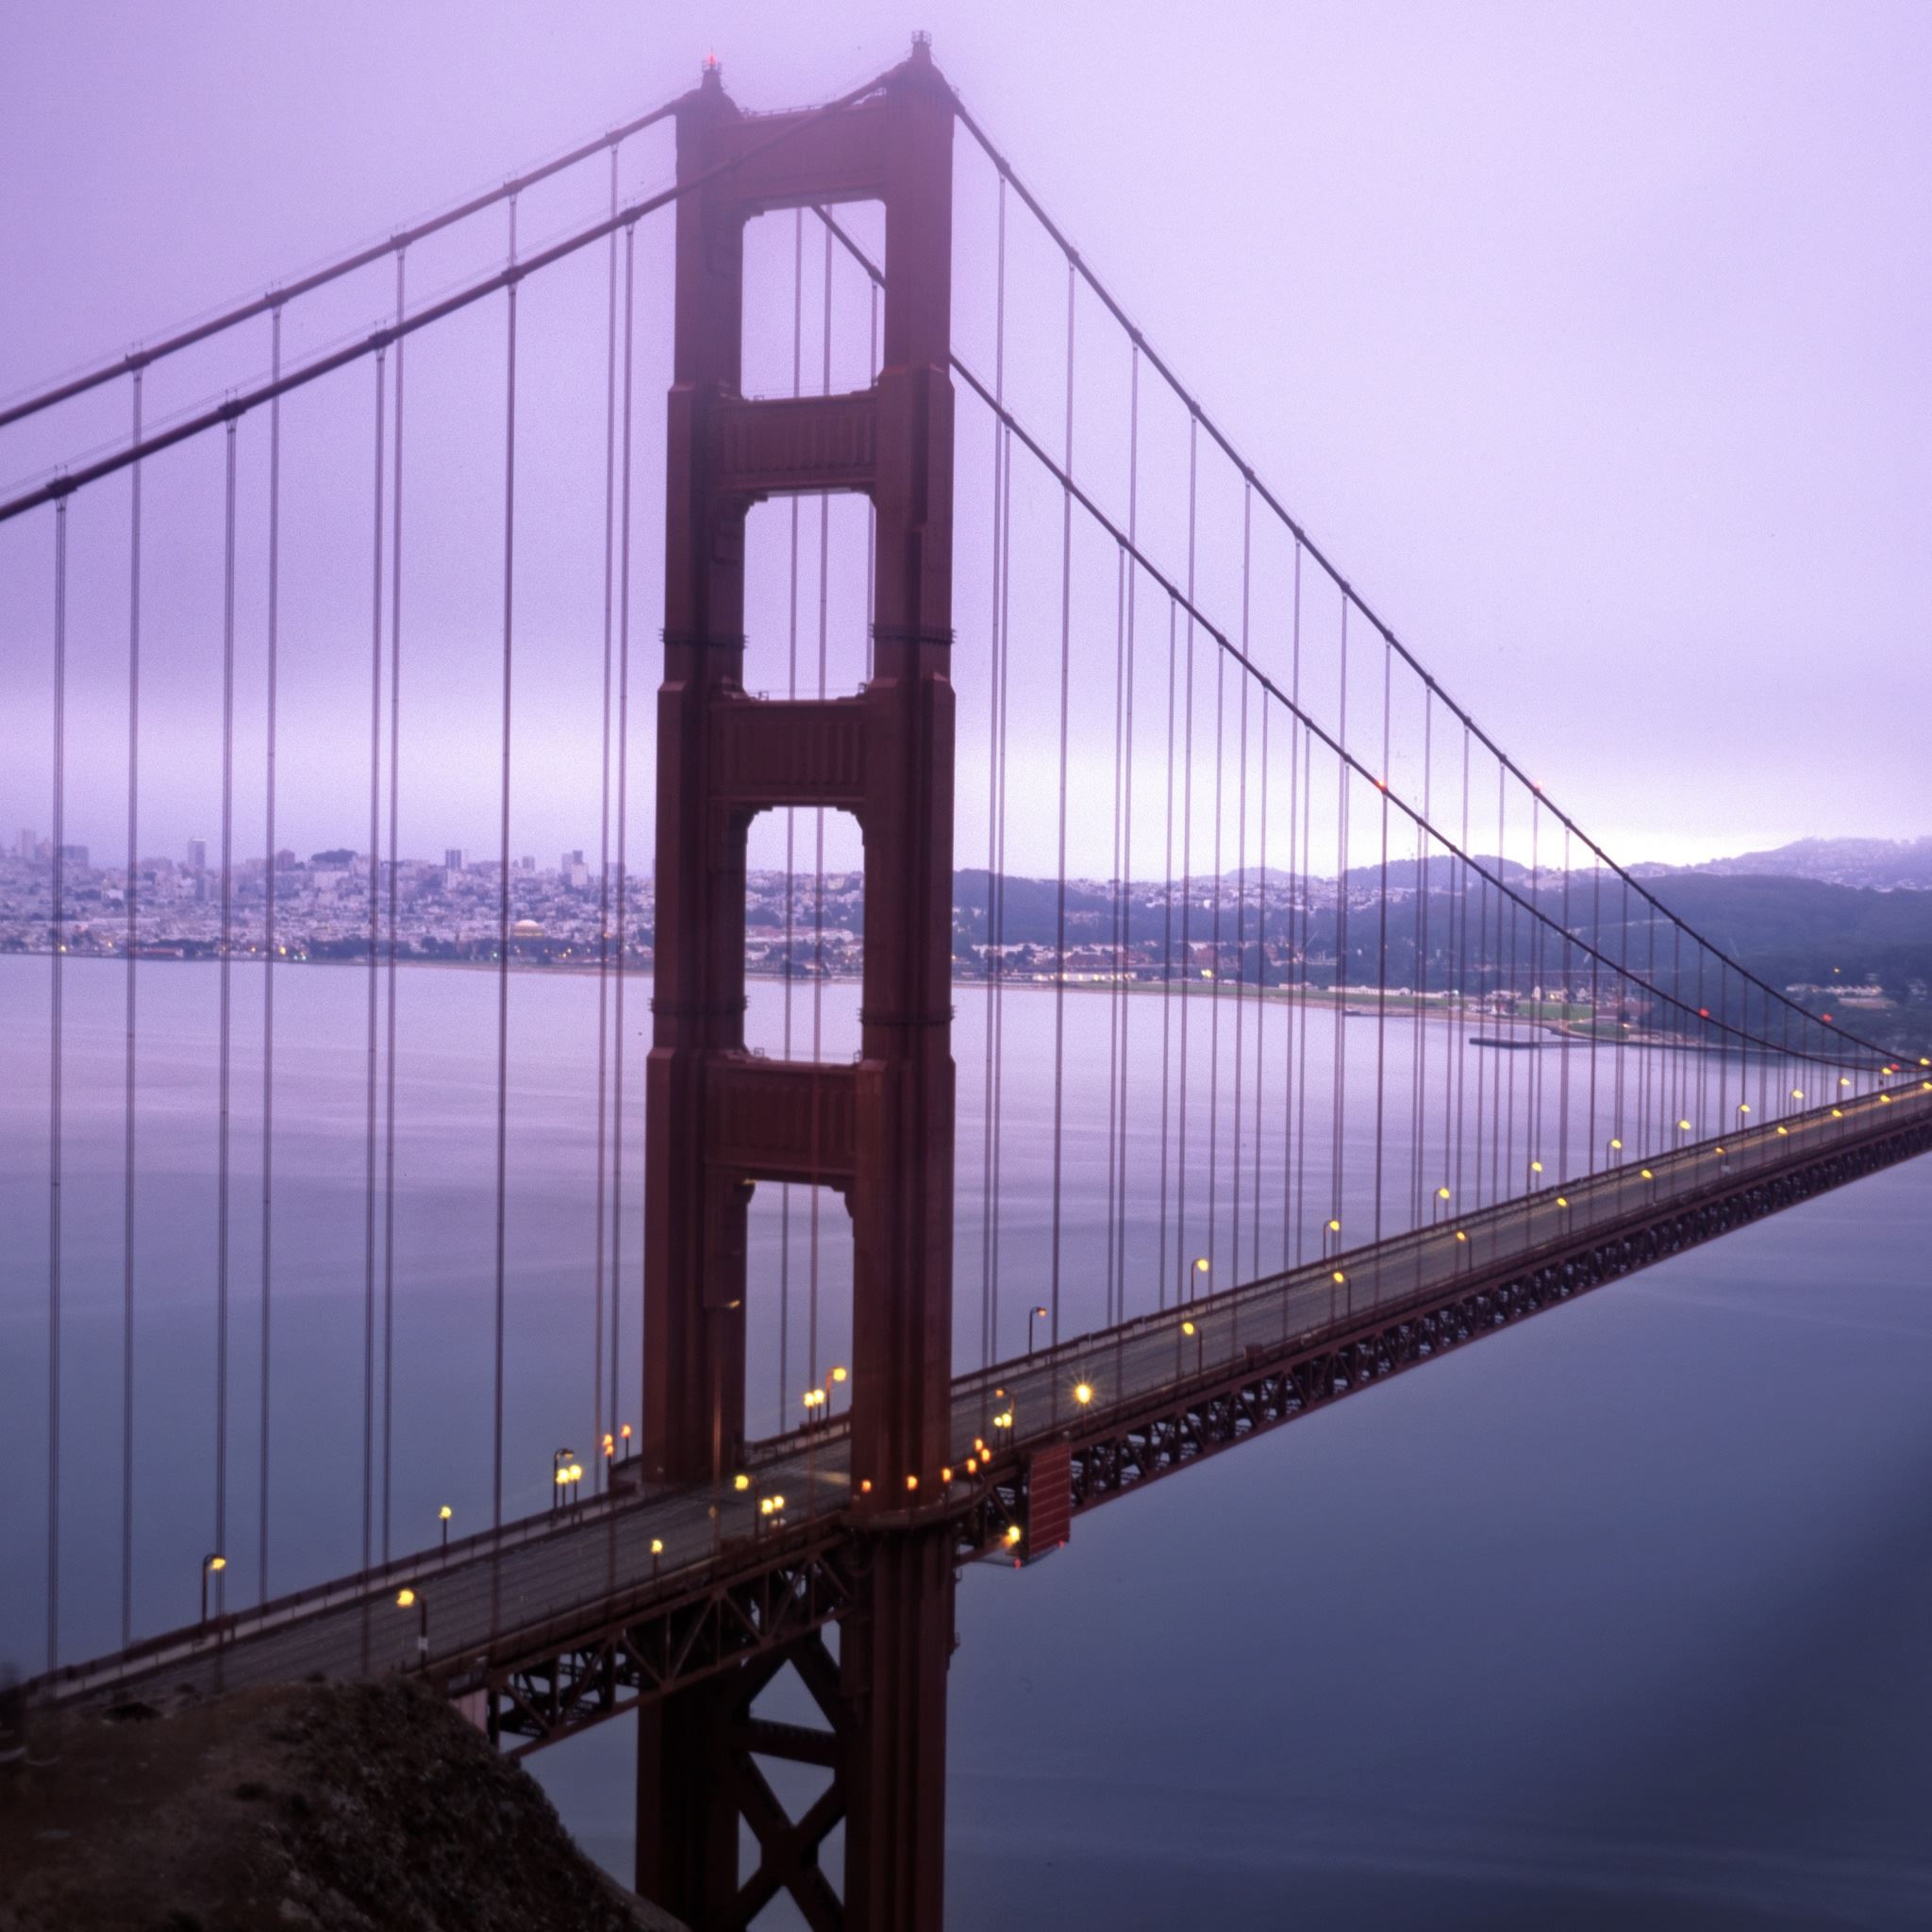 Violet Hour And Fog Surround The Golden Gate iPad Air wallpaper 